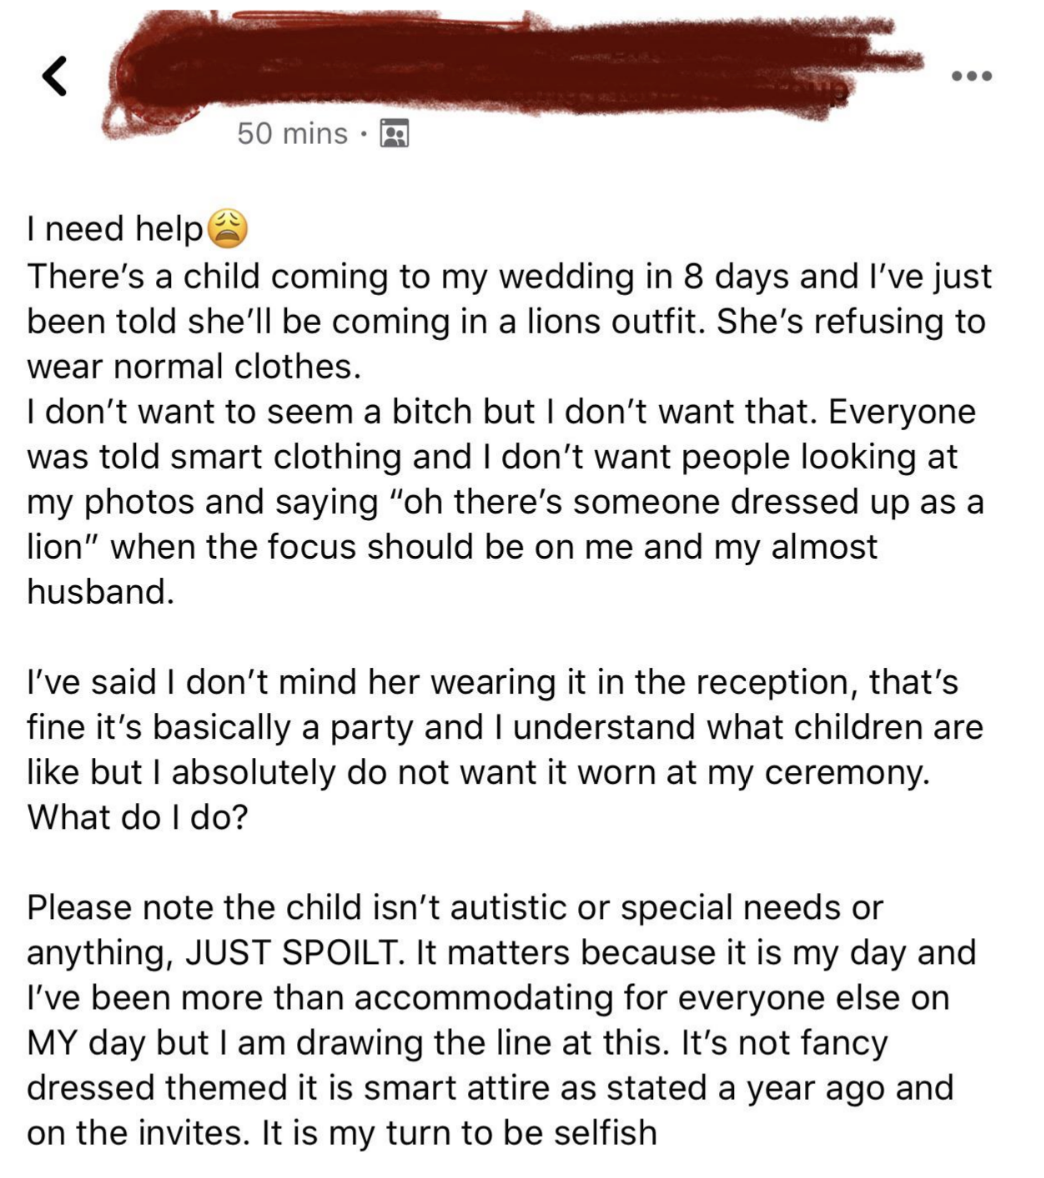 bride upset that the child will be wearing a costume